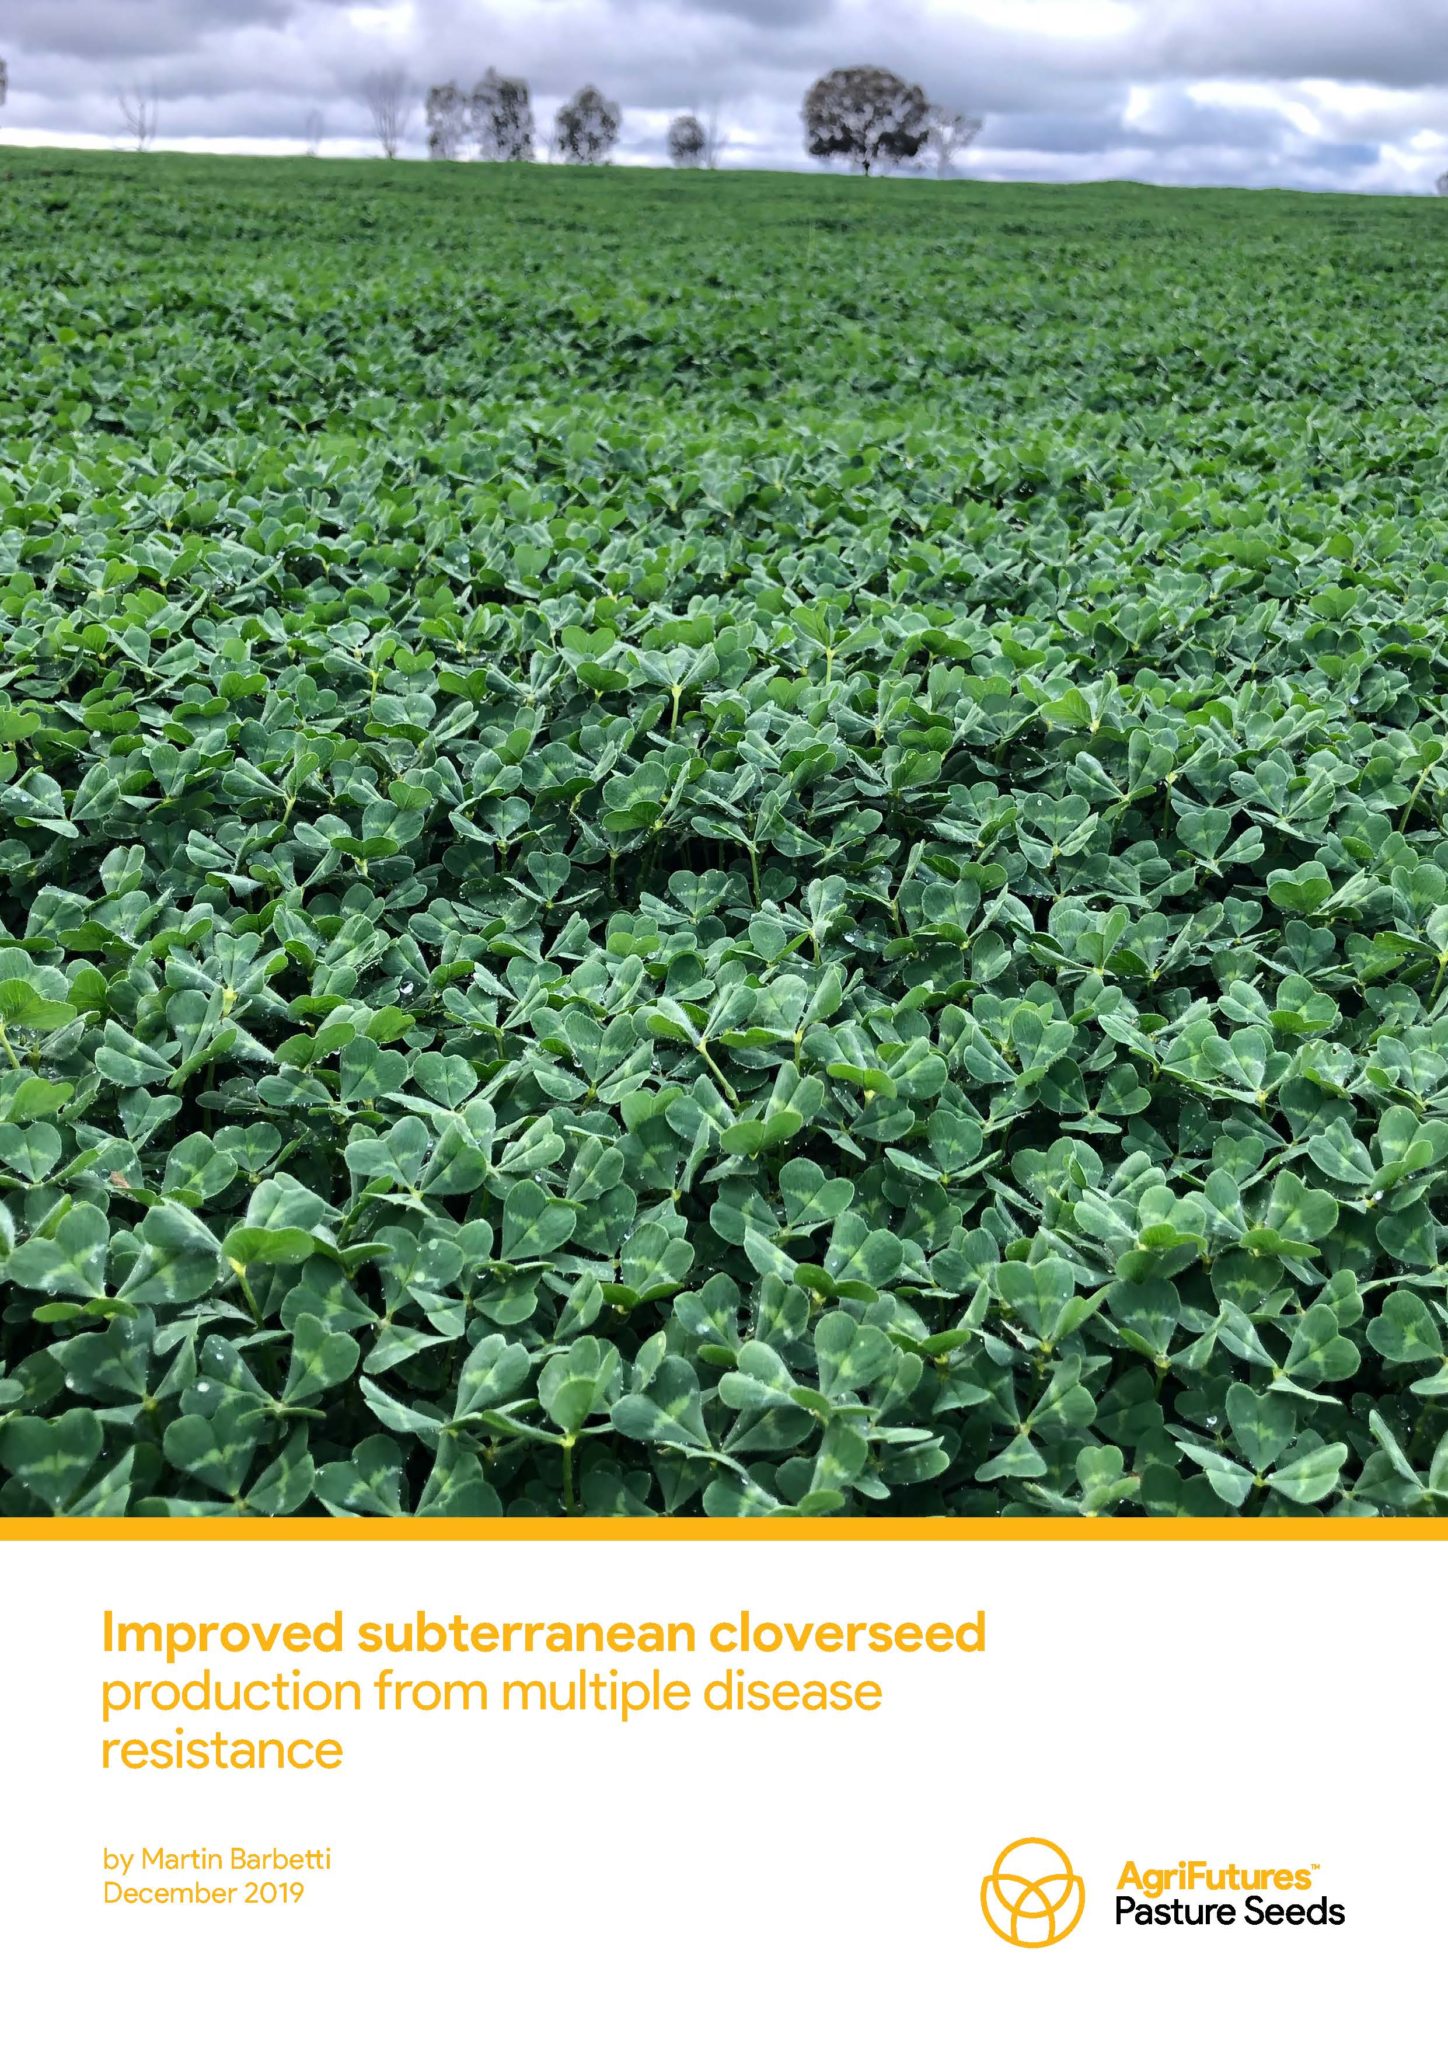 Improved subterranean cloverseed production from multiple disease resistance - image